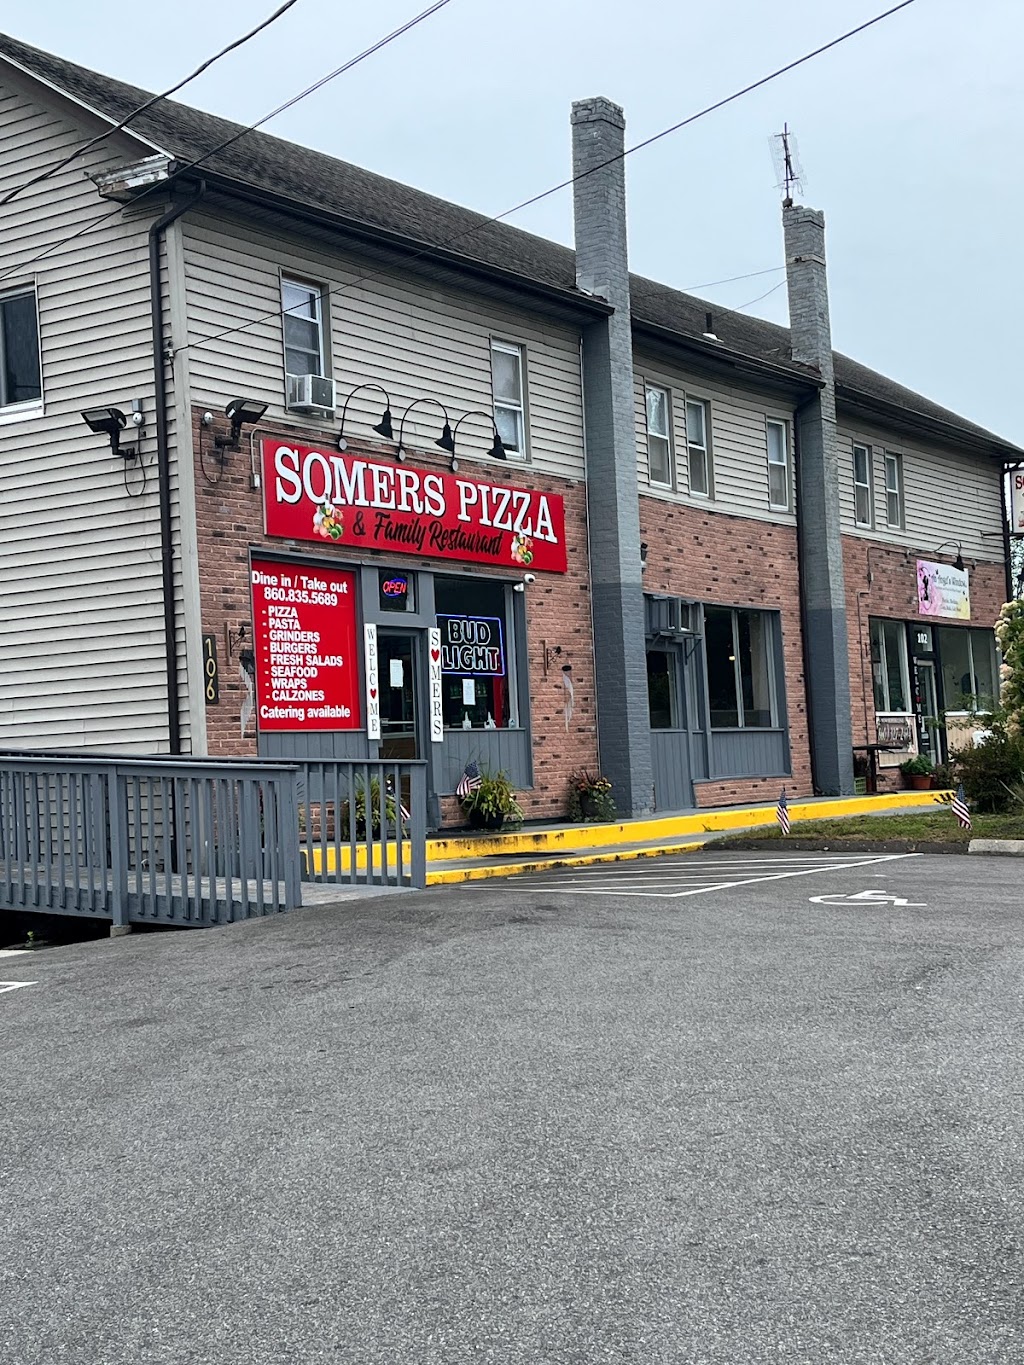 Somers Pizza and Family Restaurant | 106 Main St, Somers, CT 06071 | Phone: (860) 835-5689